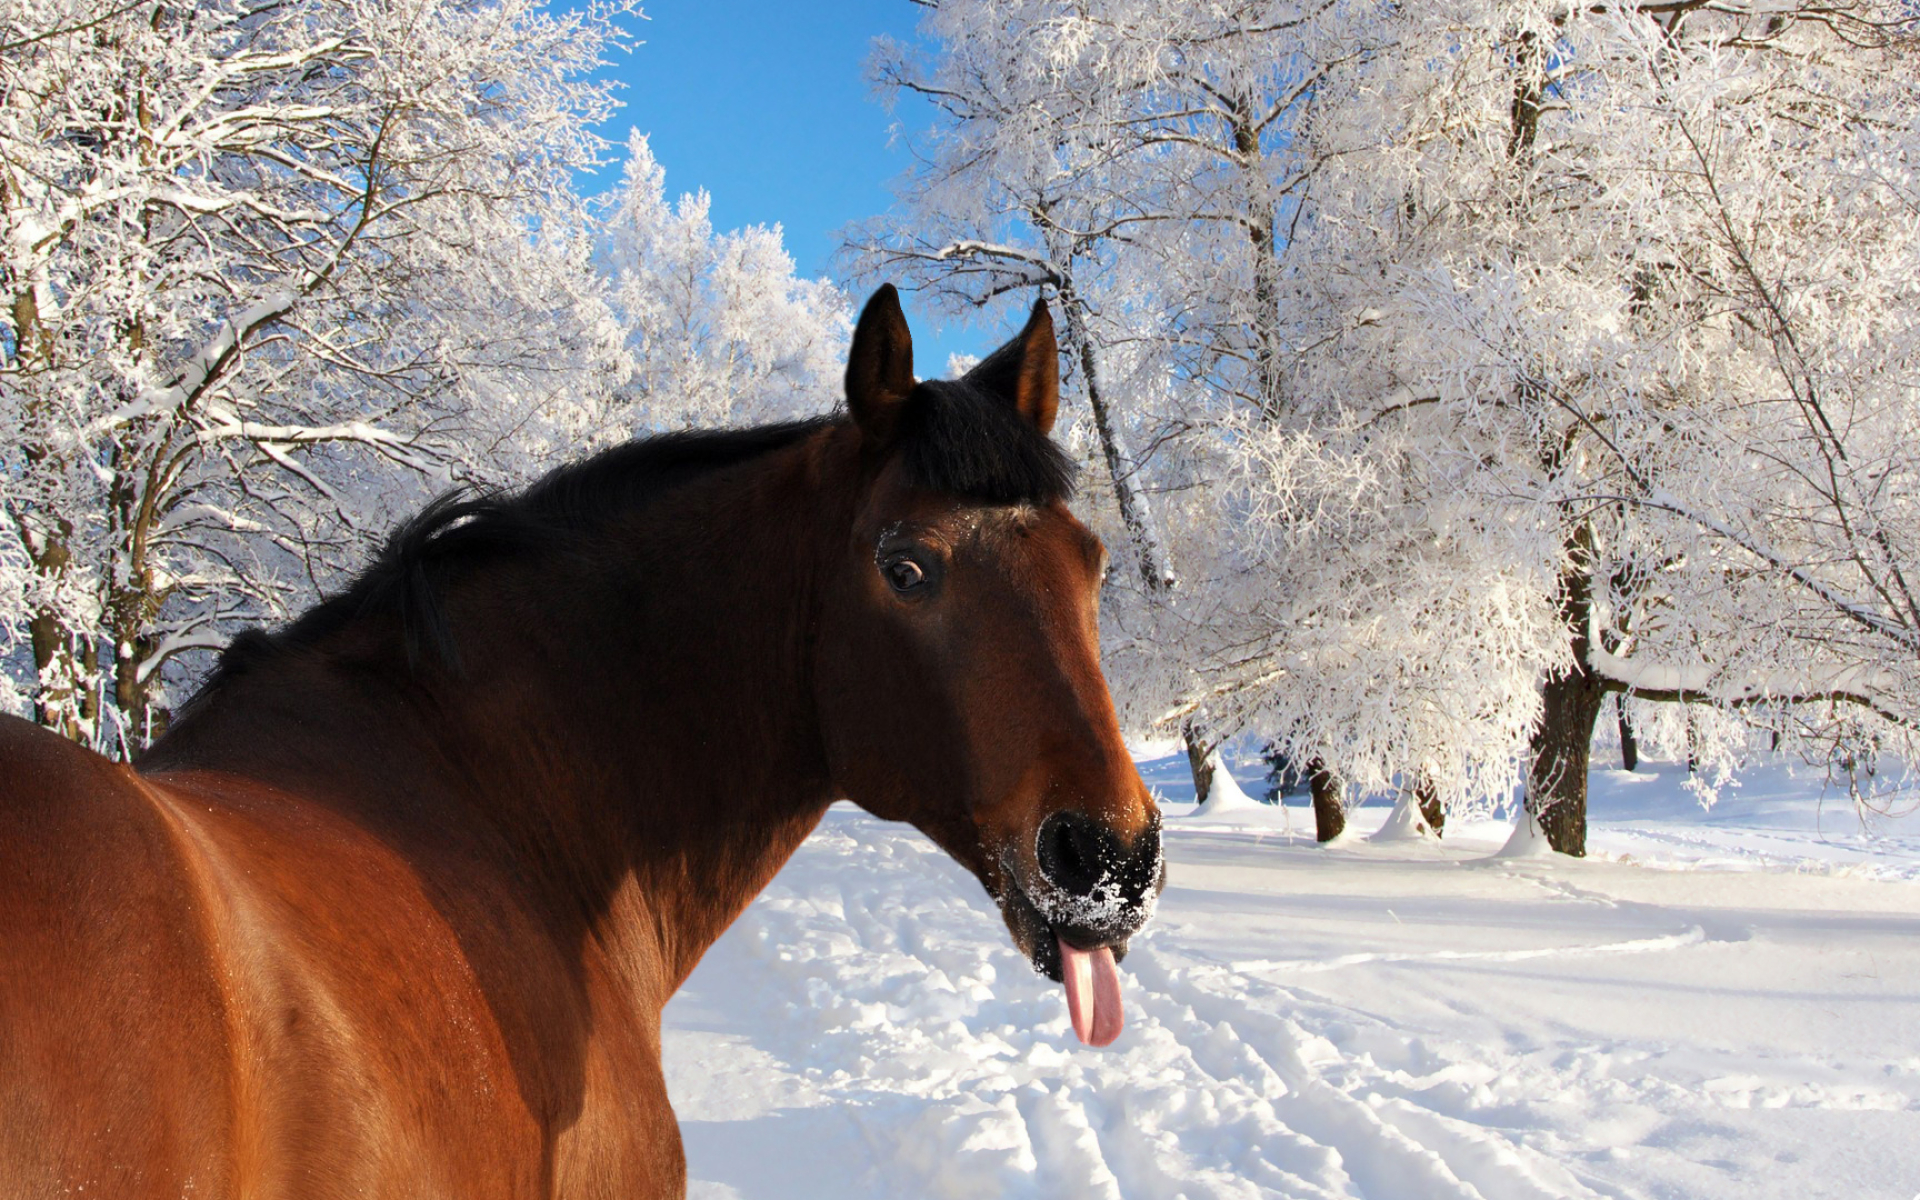 Horses in the snow, Quotes about horses, Snowy beauty, Majestic creatures, 1920x1200 HD Desktop